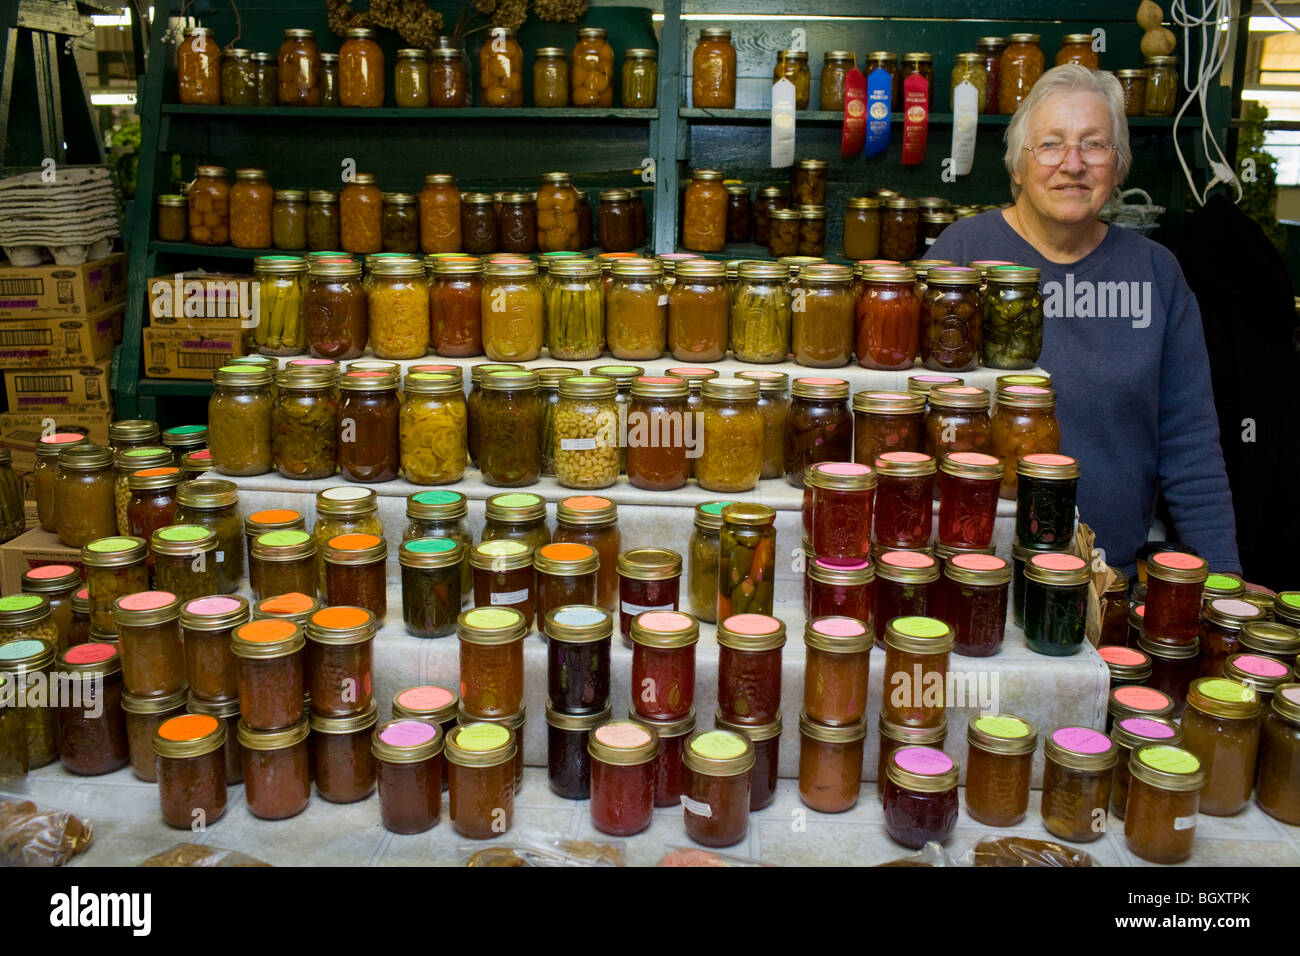 Woman selling canned goods at Farmer's Market in Montgomery, Alabama Stock Photo